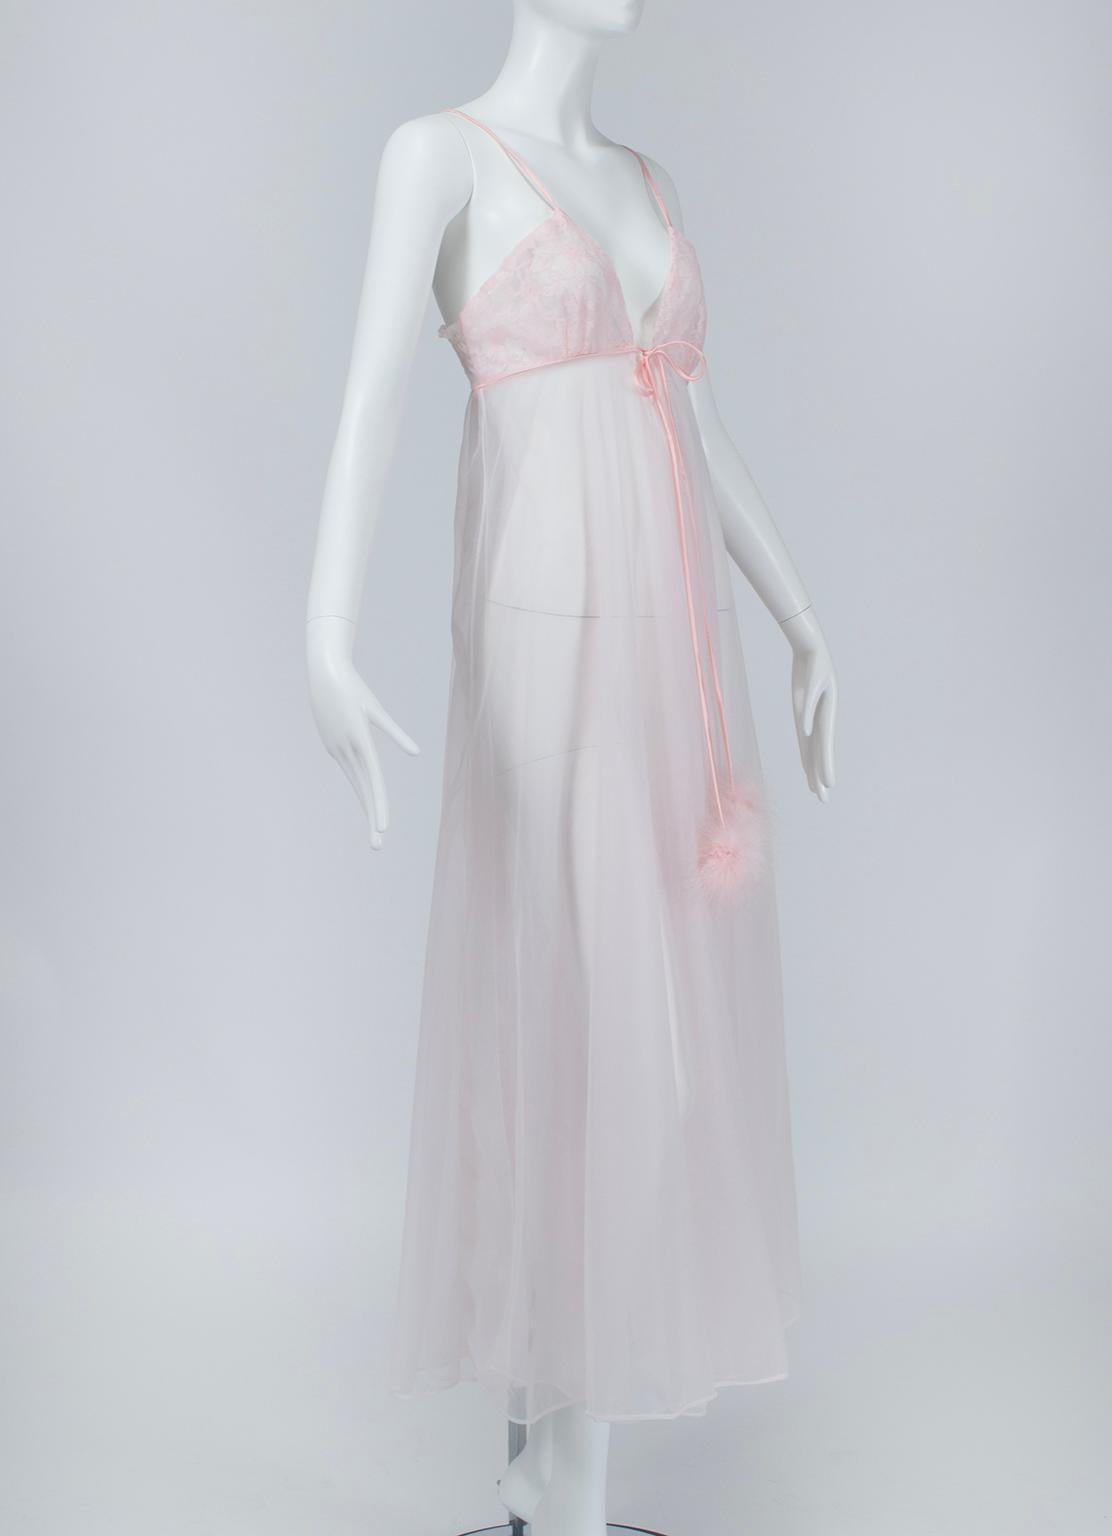 Too beautiful to be kept in the bedroom, this negligée is lovely enough to wear in public. The 2 ½ foot marabou feather cords may be tied in front or back for two completely different looks.

Vintage sleeveless blush pink nightgown with satin